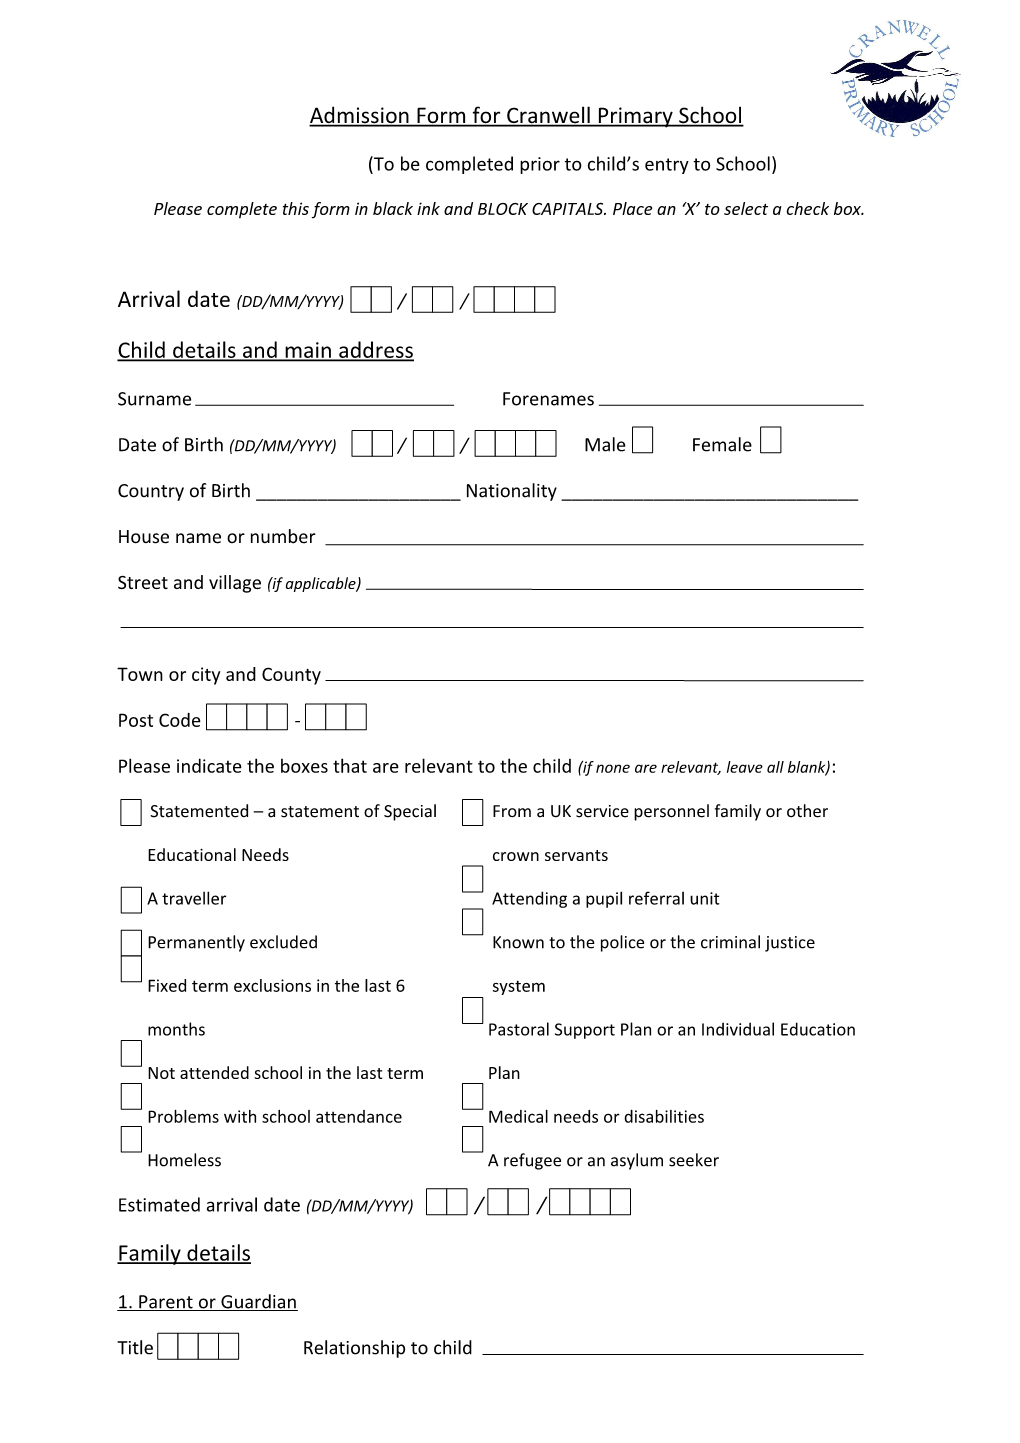 Admission Form for Cranwell Primary School